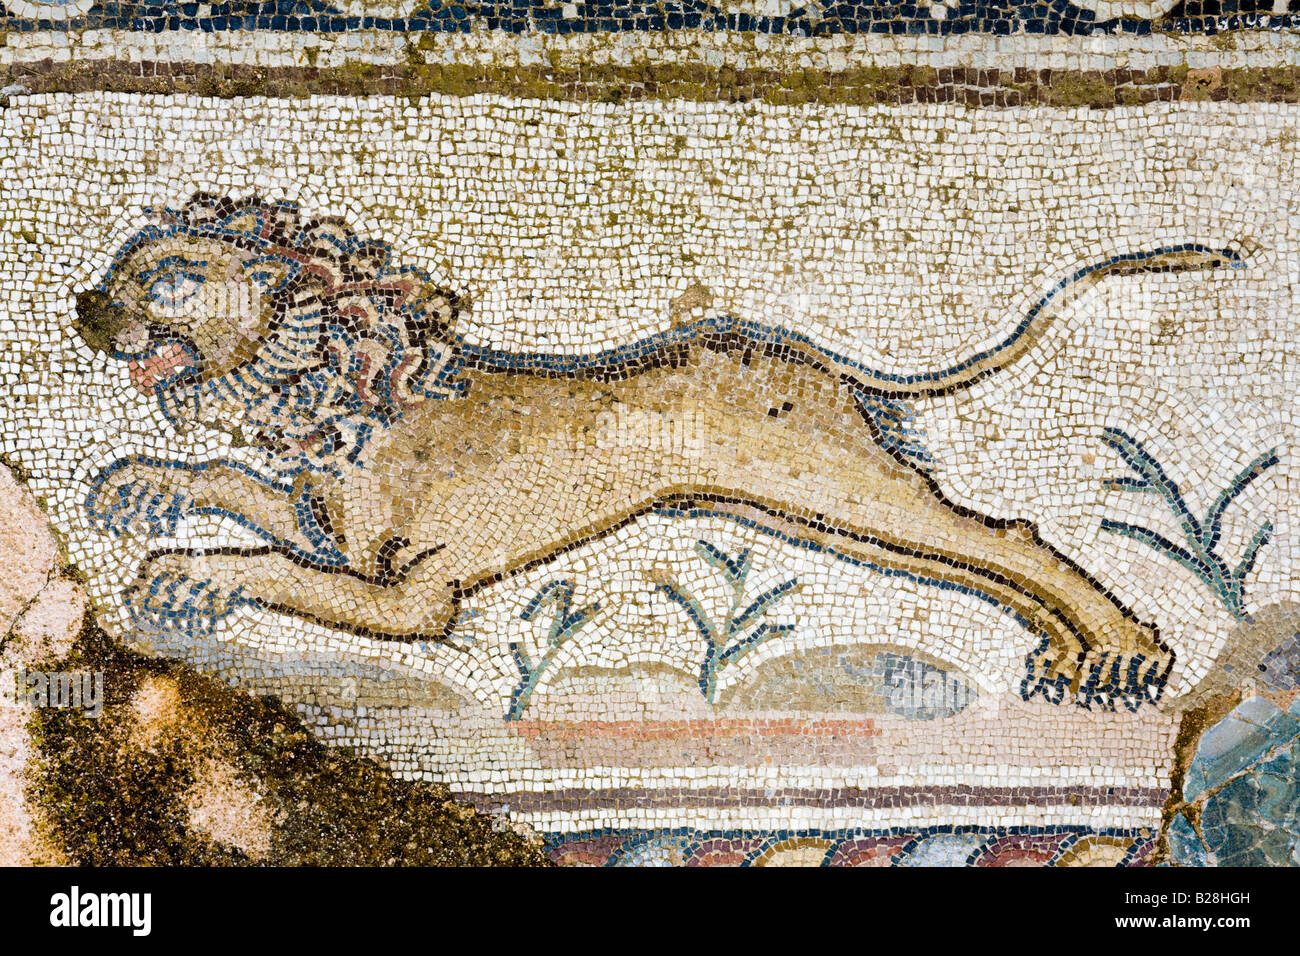 Detail of a mosaic in the House of Theseus, Pafos Mosaics, Nea Pafos, Cyprus Stock Photo